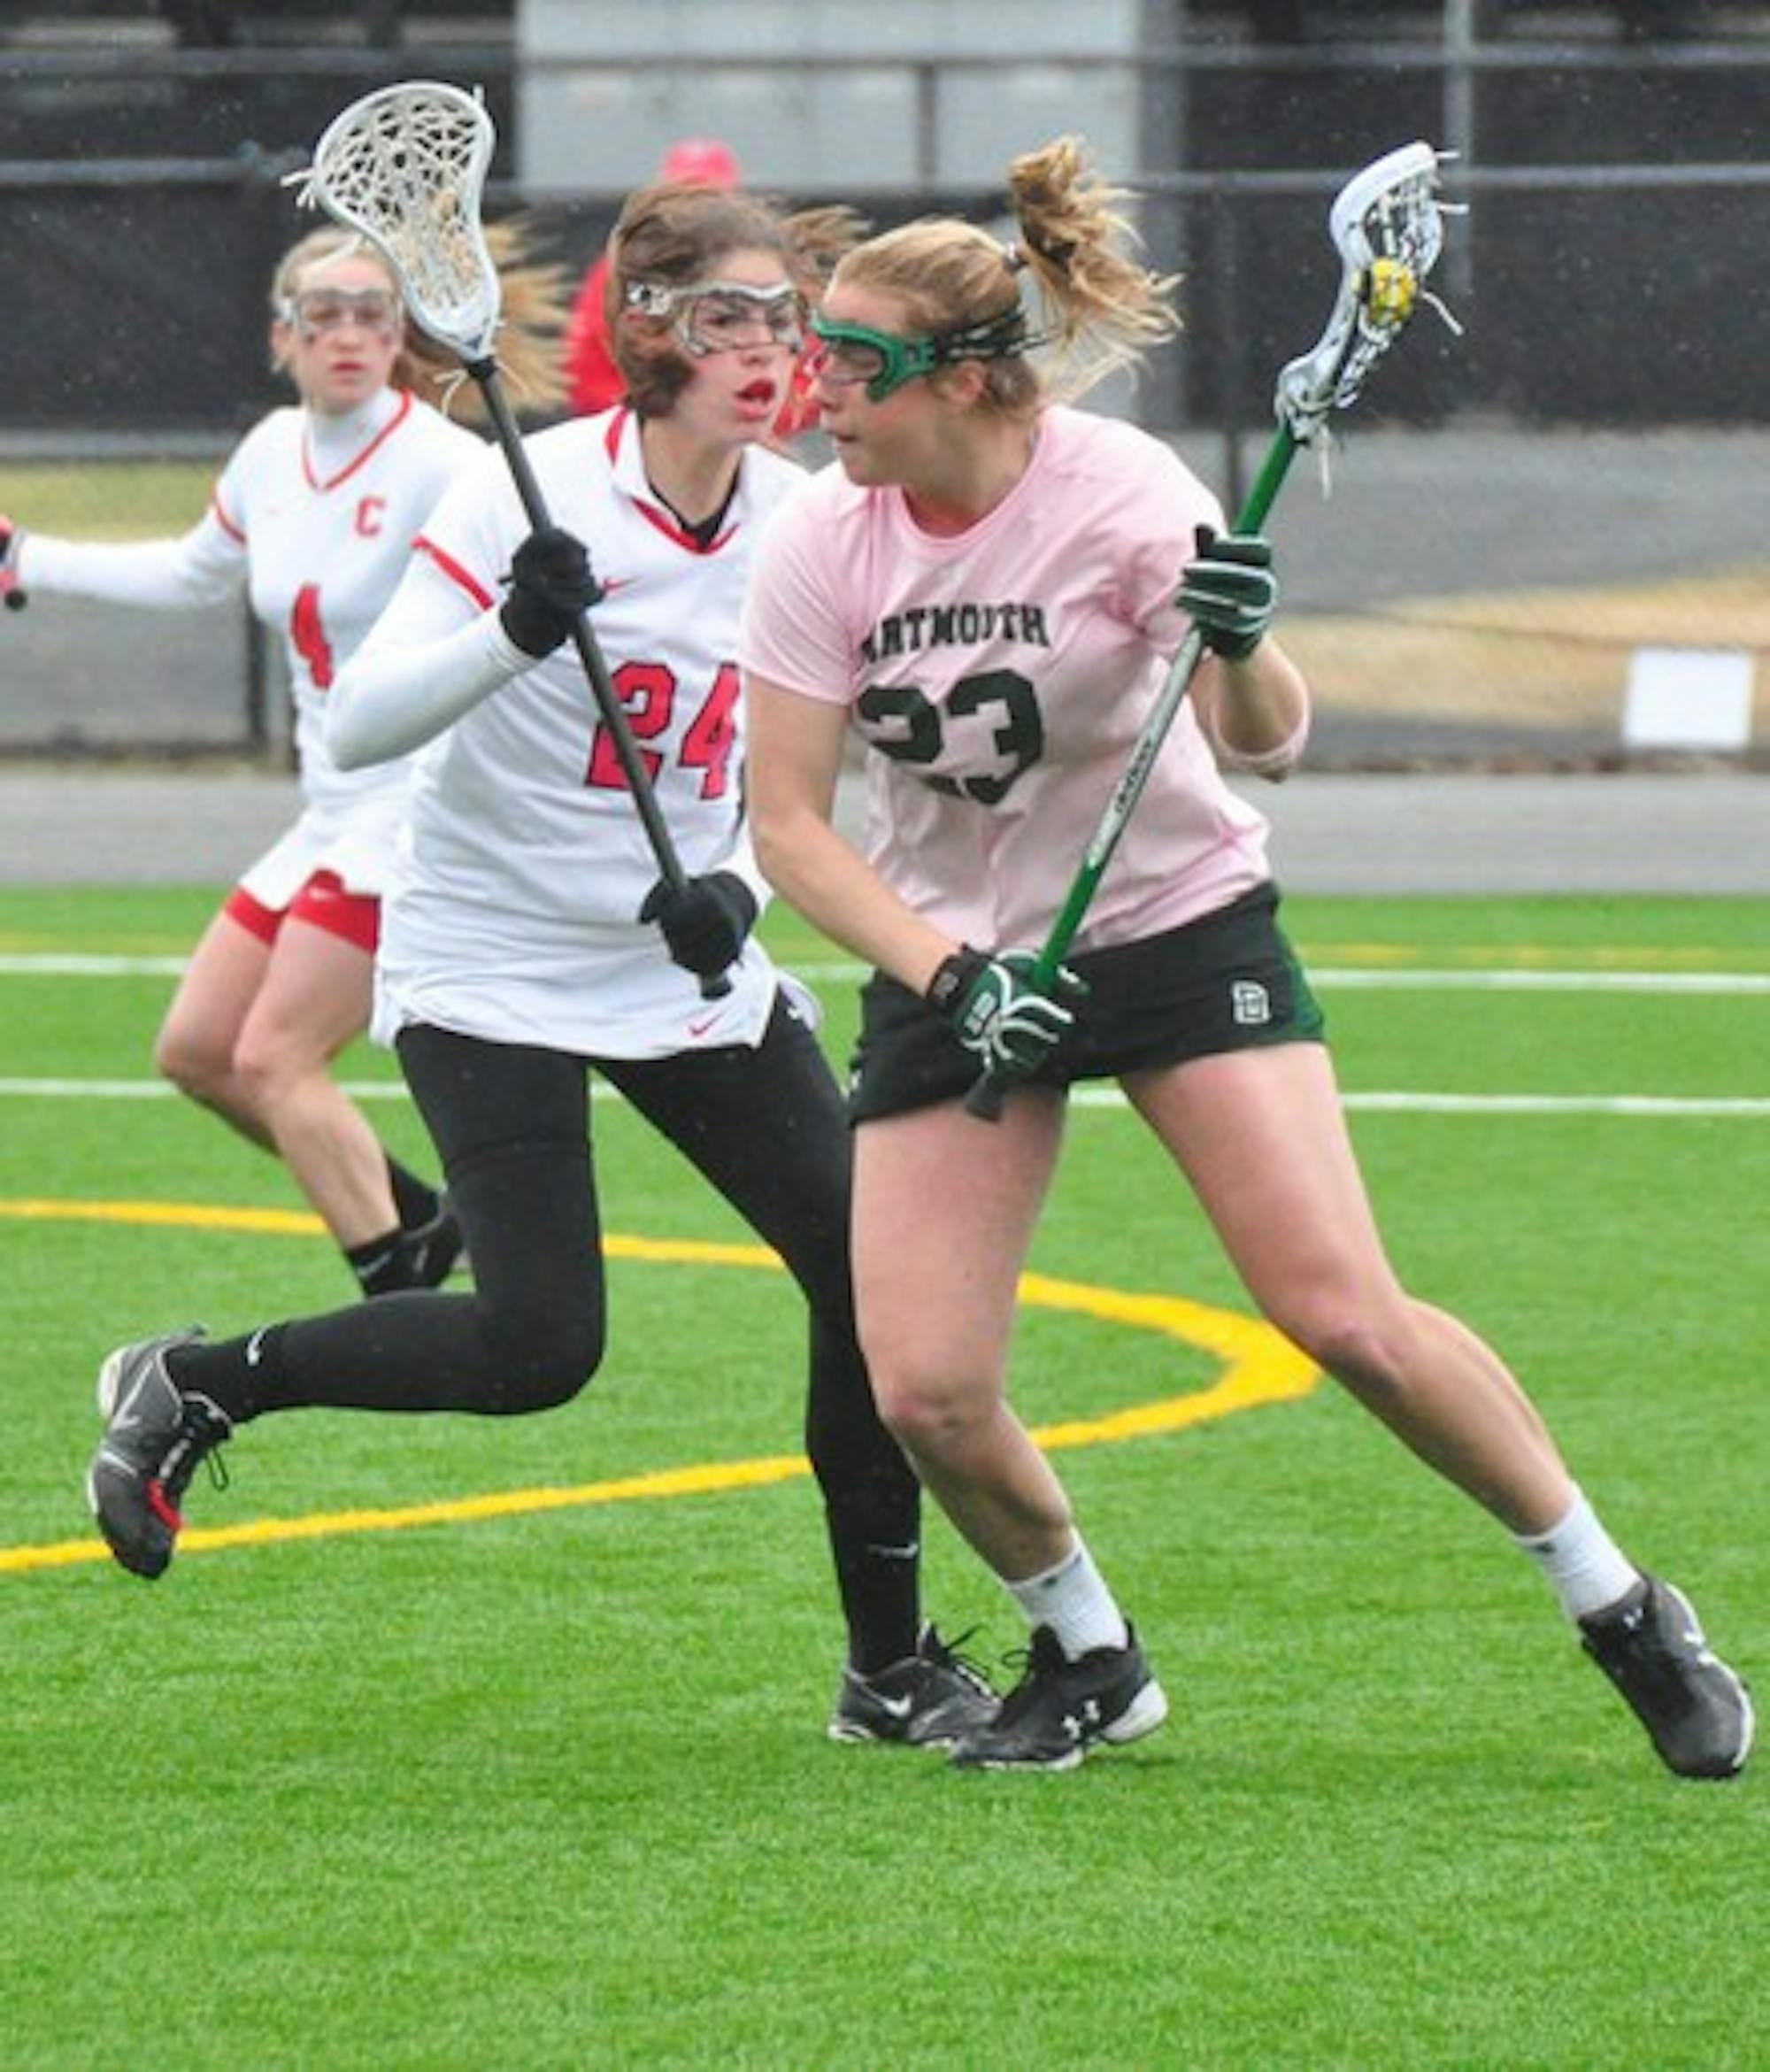 Kat Collins '11 led Dartmouth with four goals and two assists in the team's win over the Big Red on Saturday.